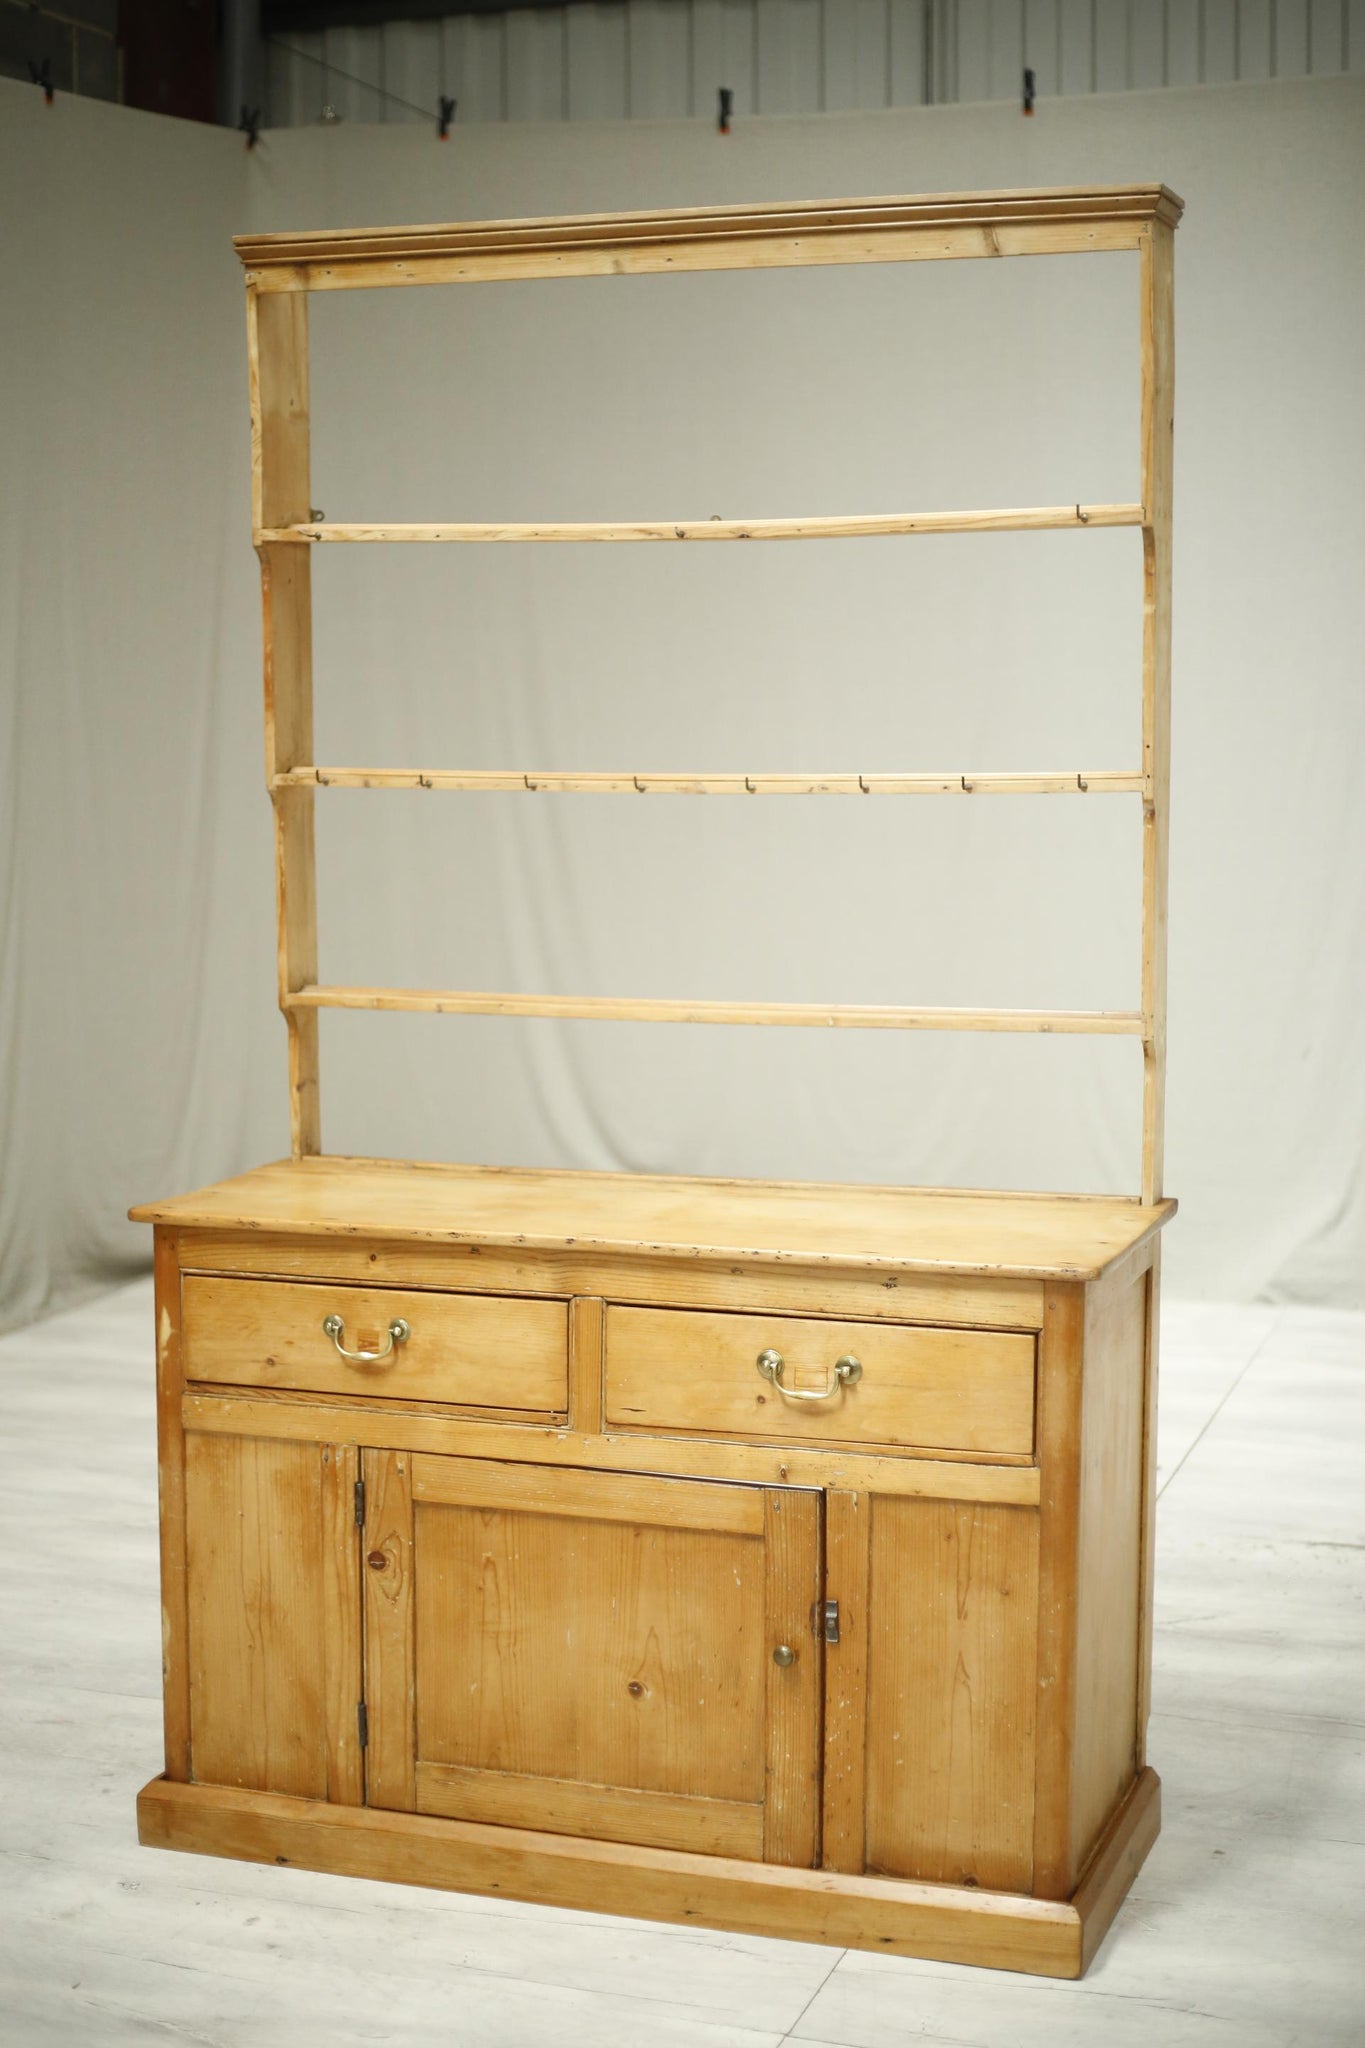 19th century Country pine dresser with plate rack